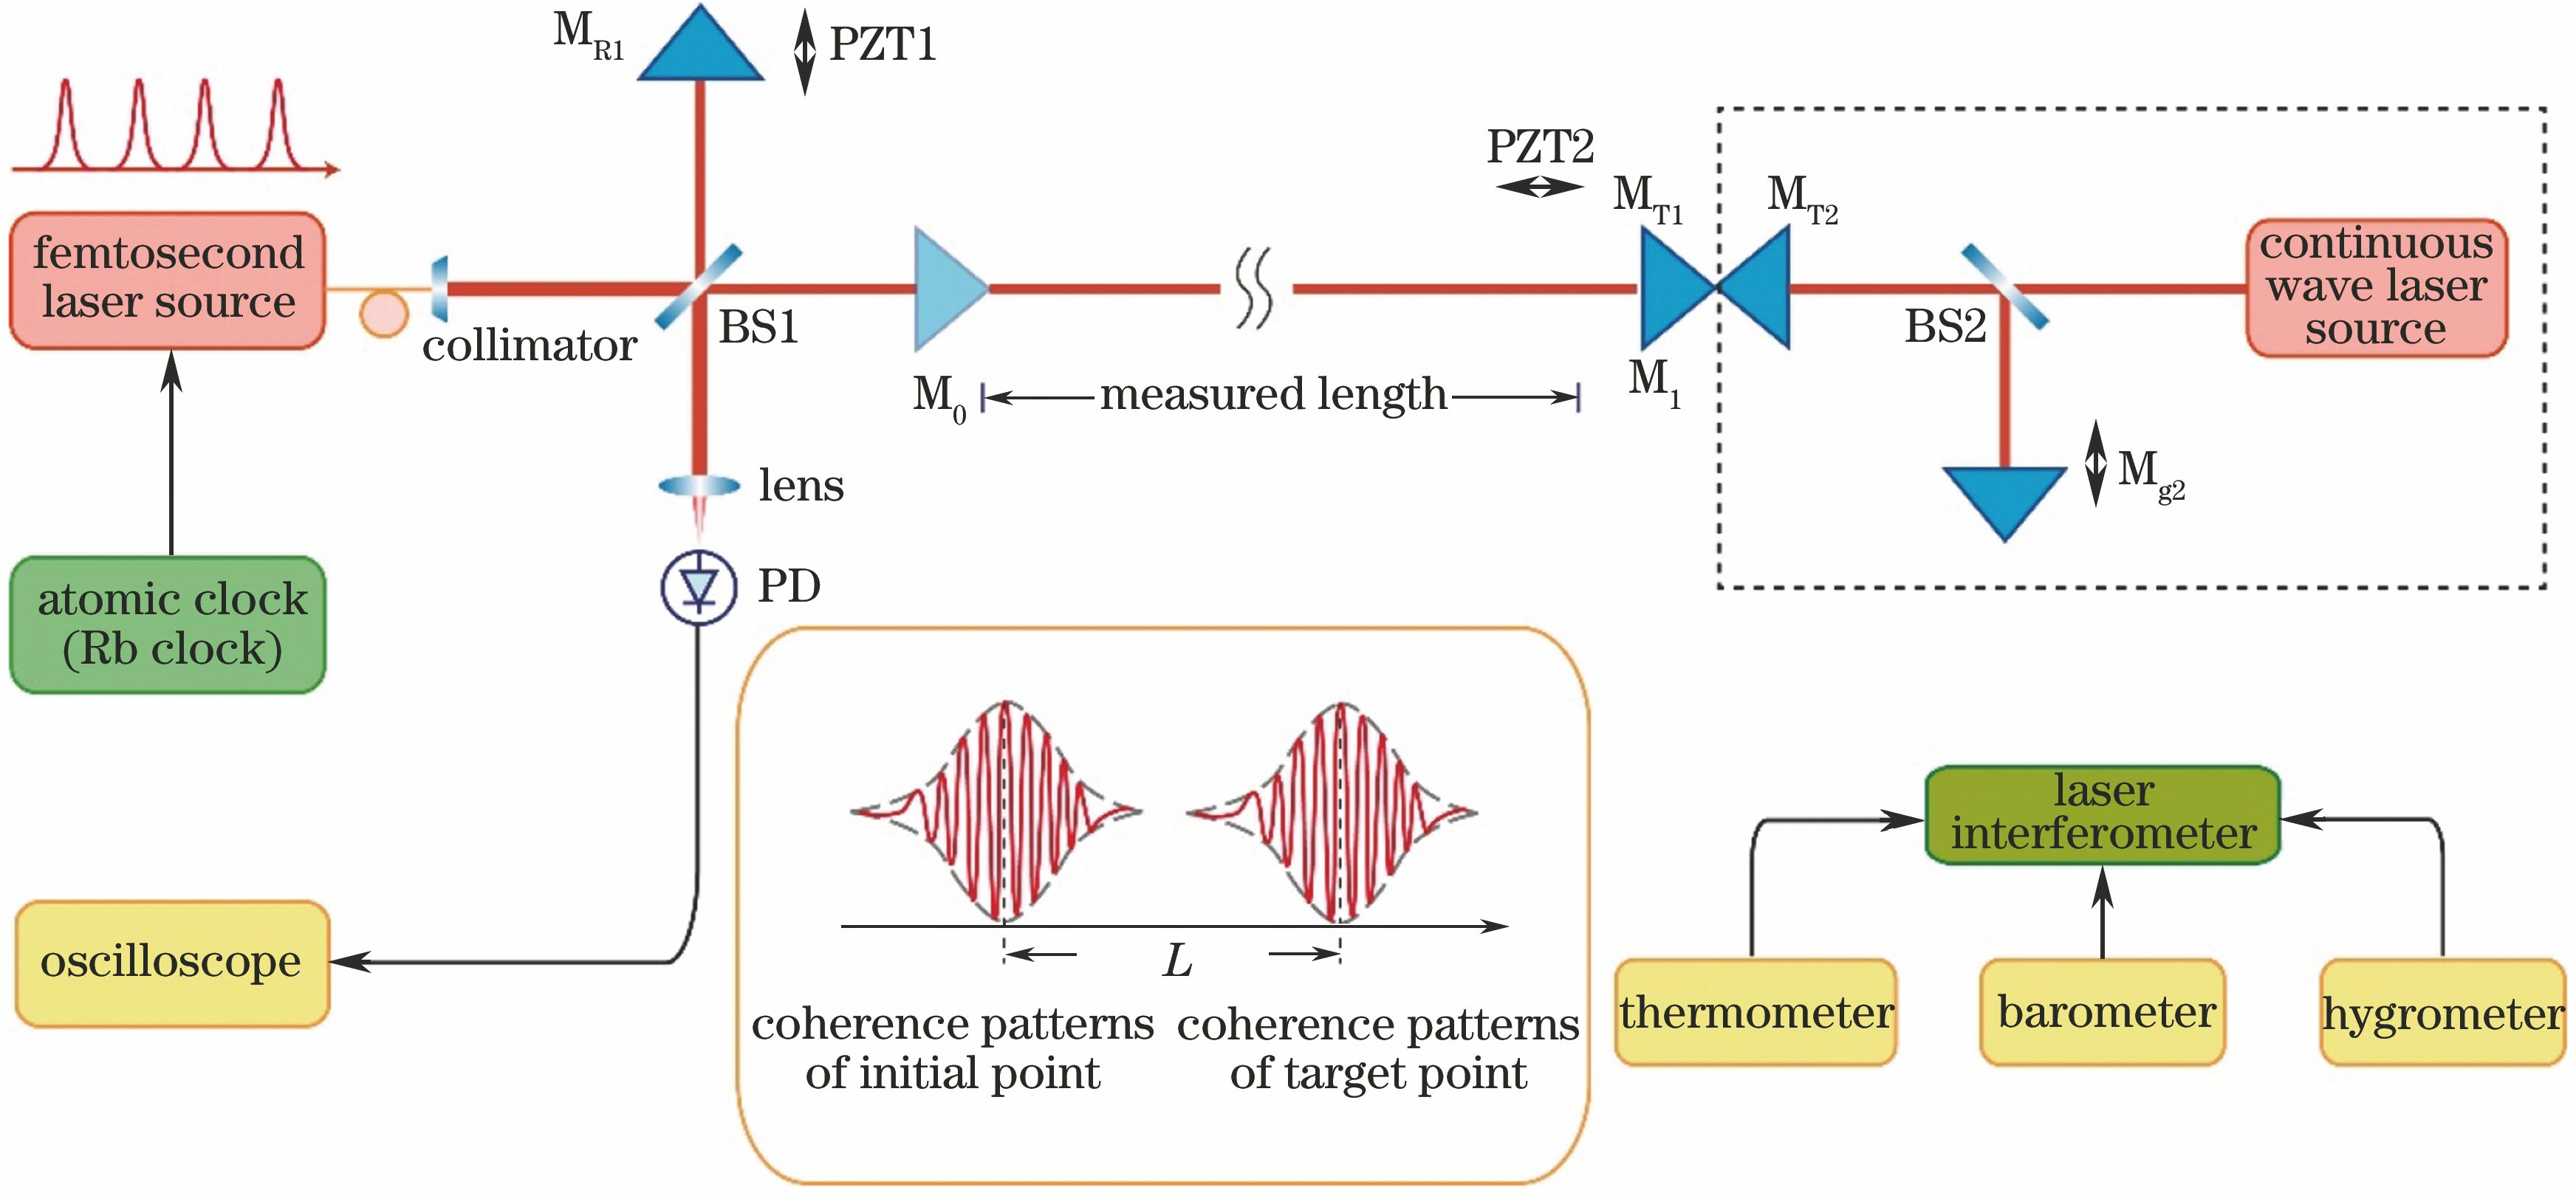 Schematic of distance measurement system by femtosecond optical frequency comb